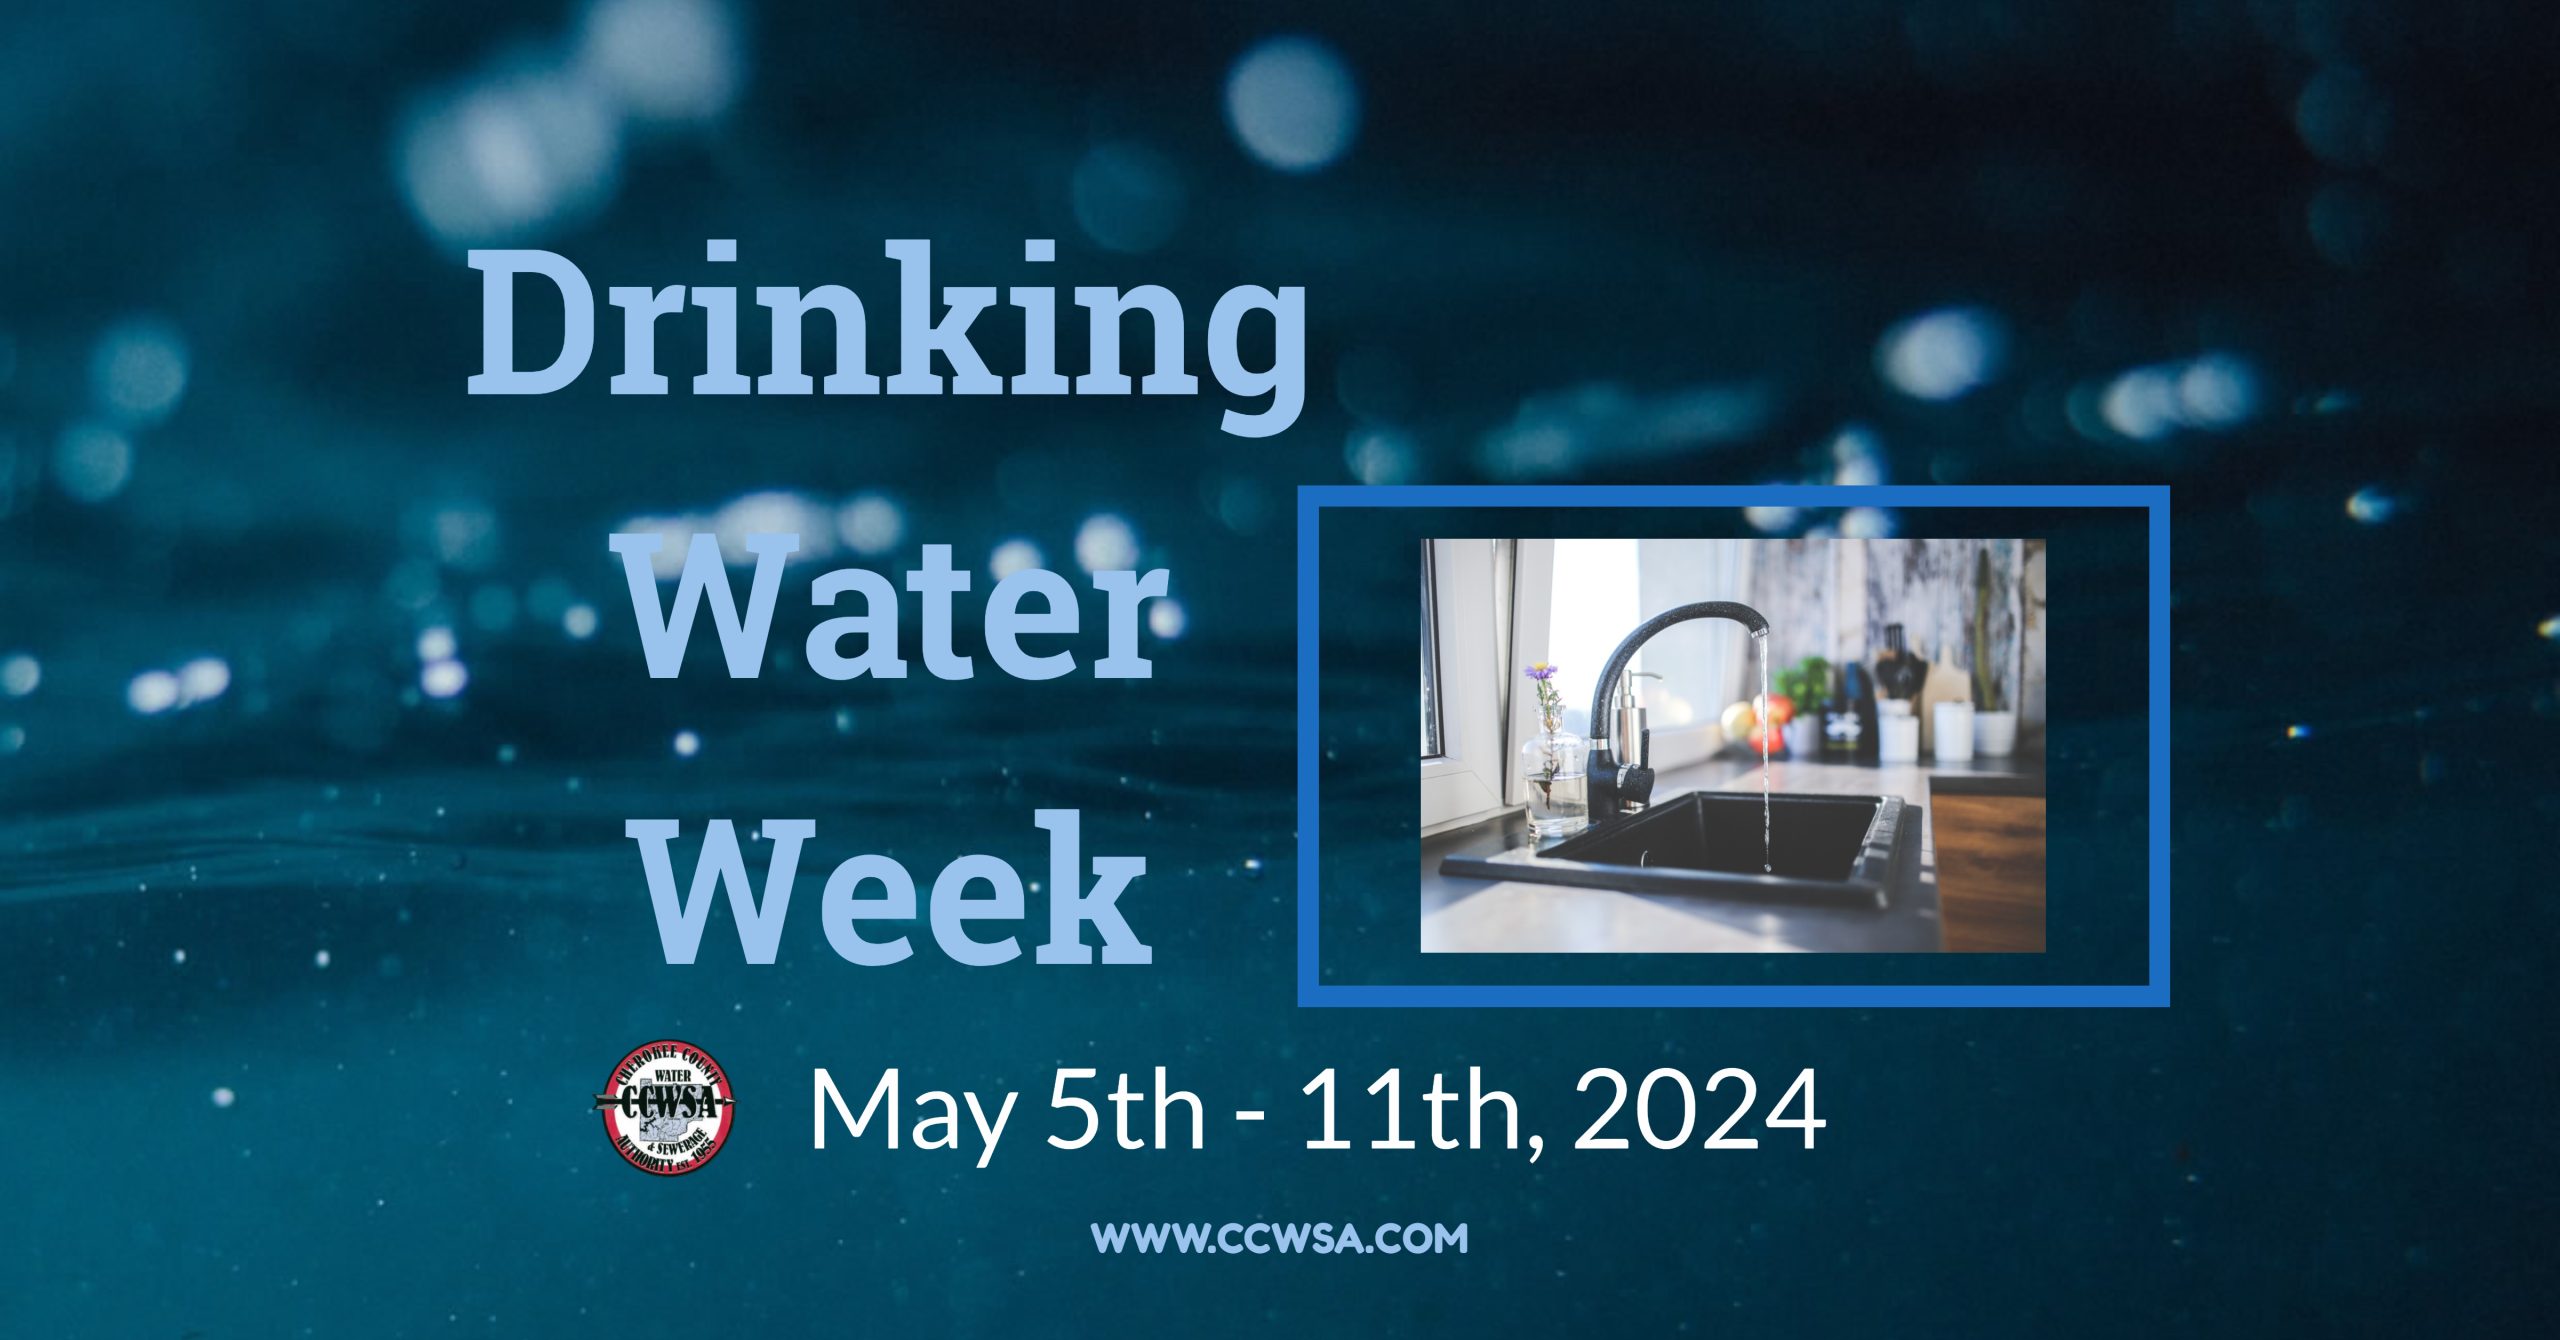 Click here to learn more about Drinking Water Week.